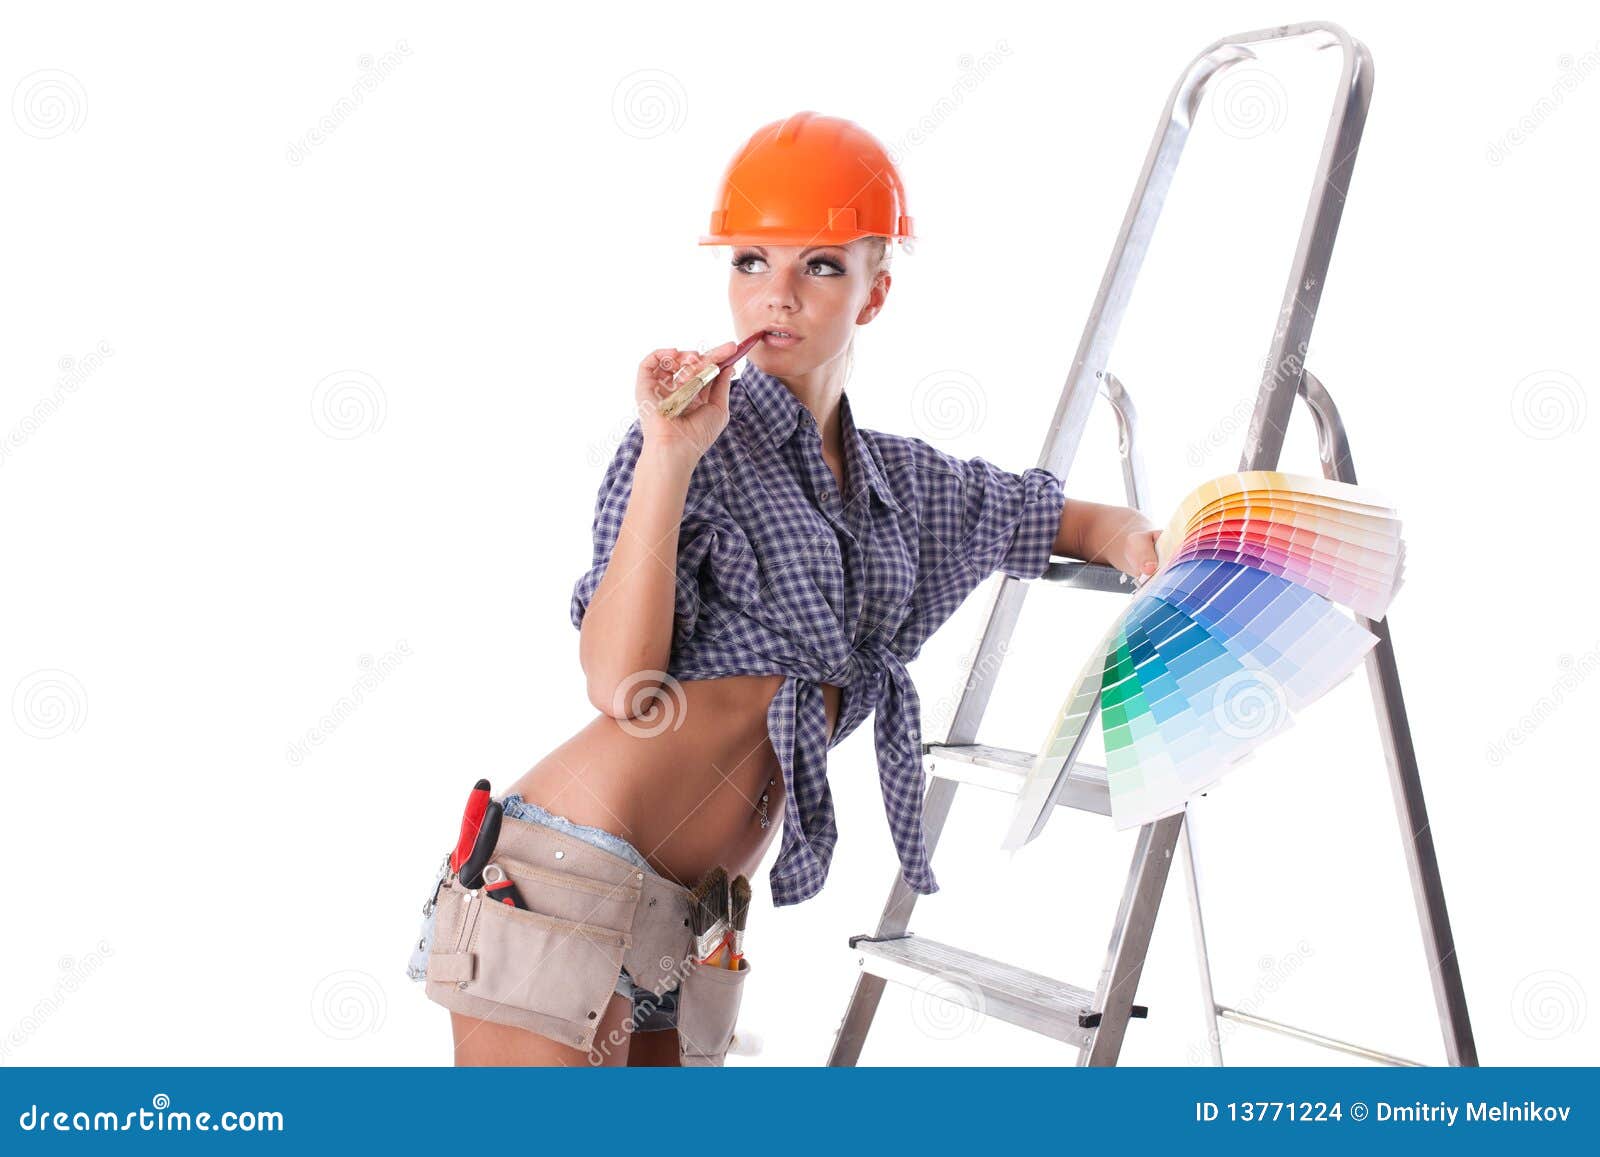 Female construction worker. Young woman in hardhat with a color guide and paintbrush on a white background.